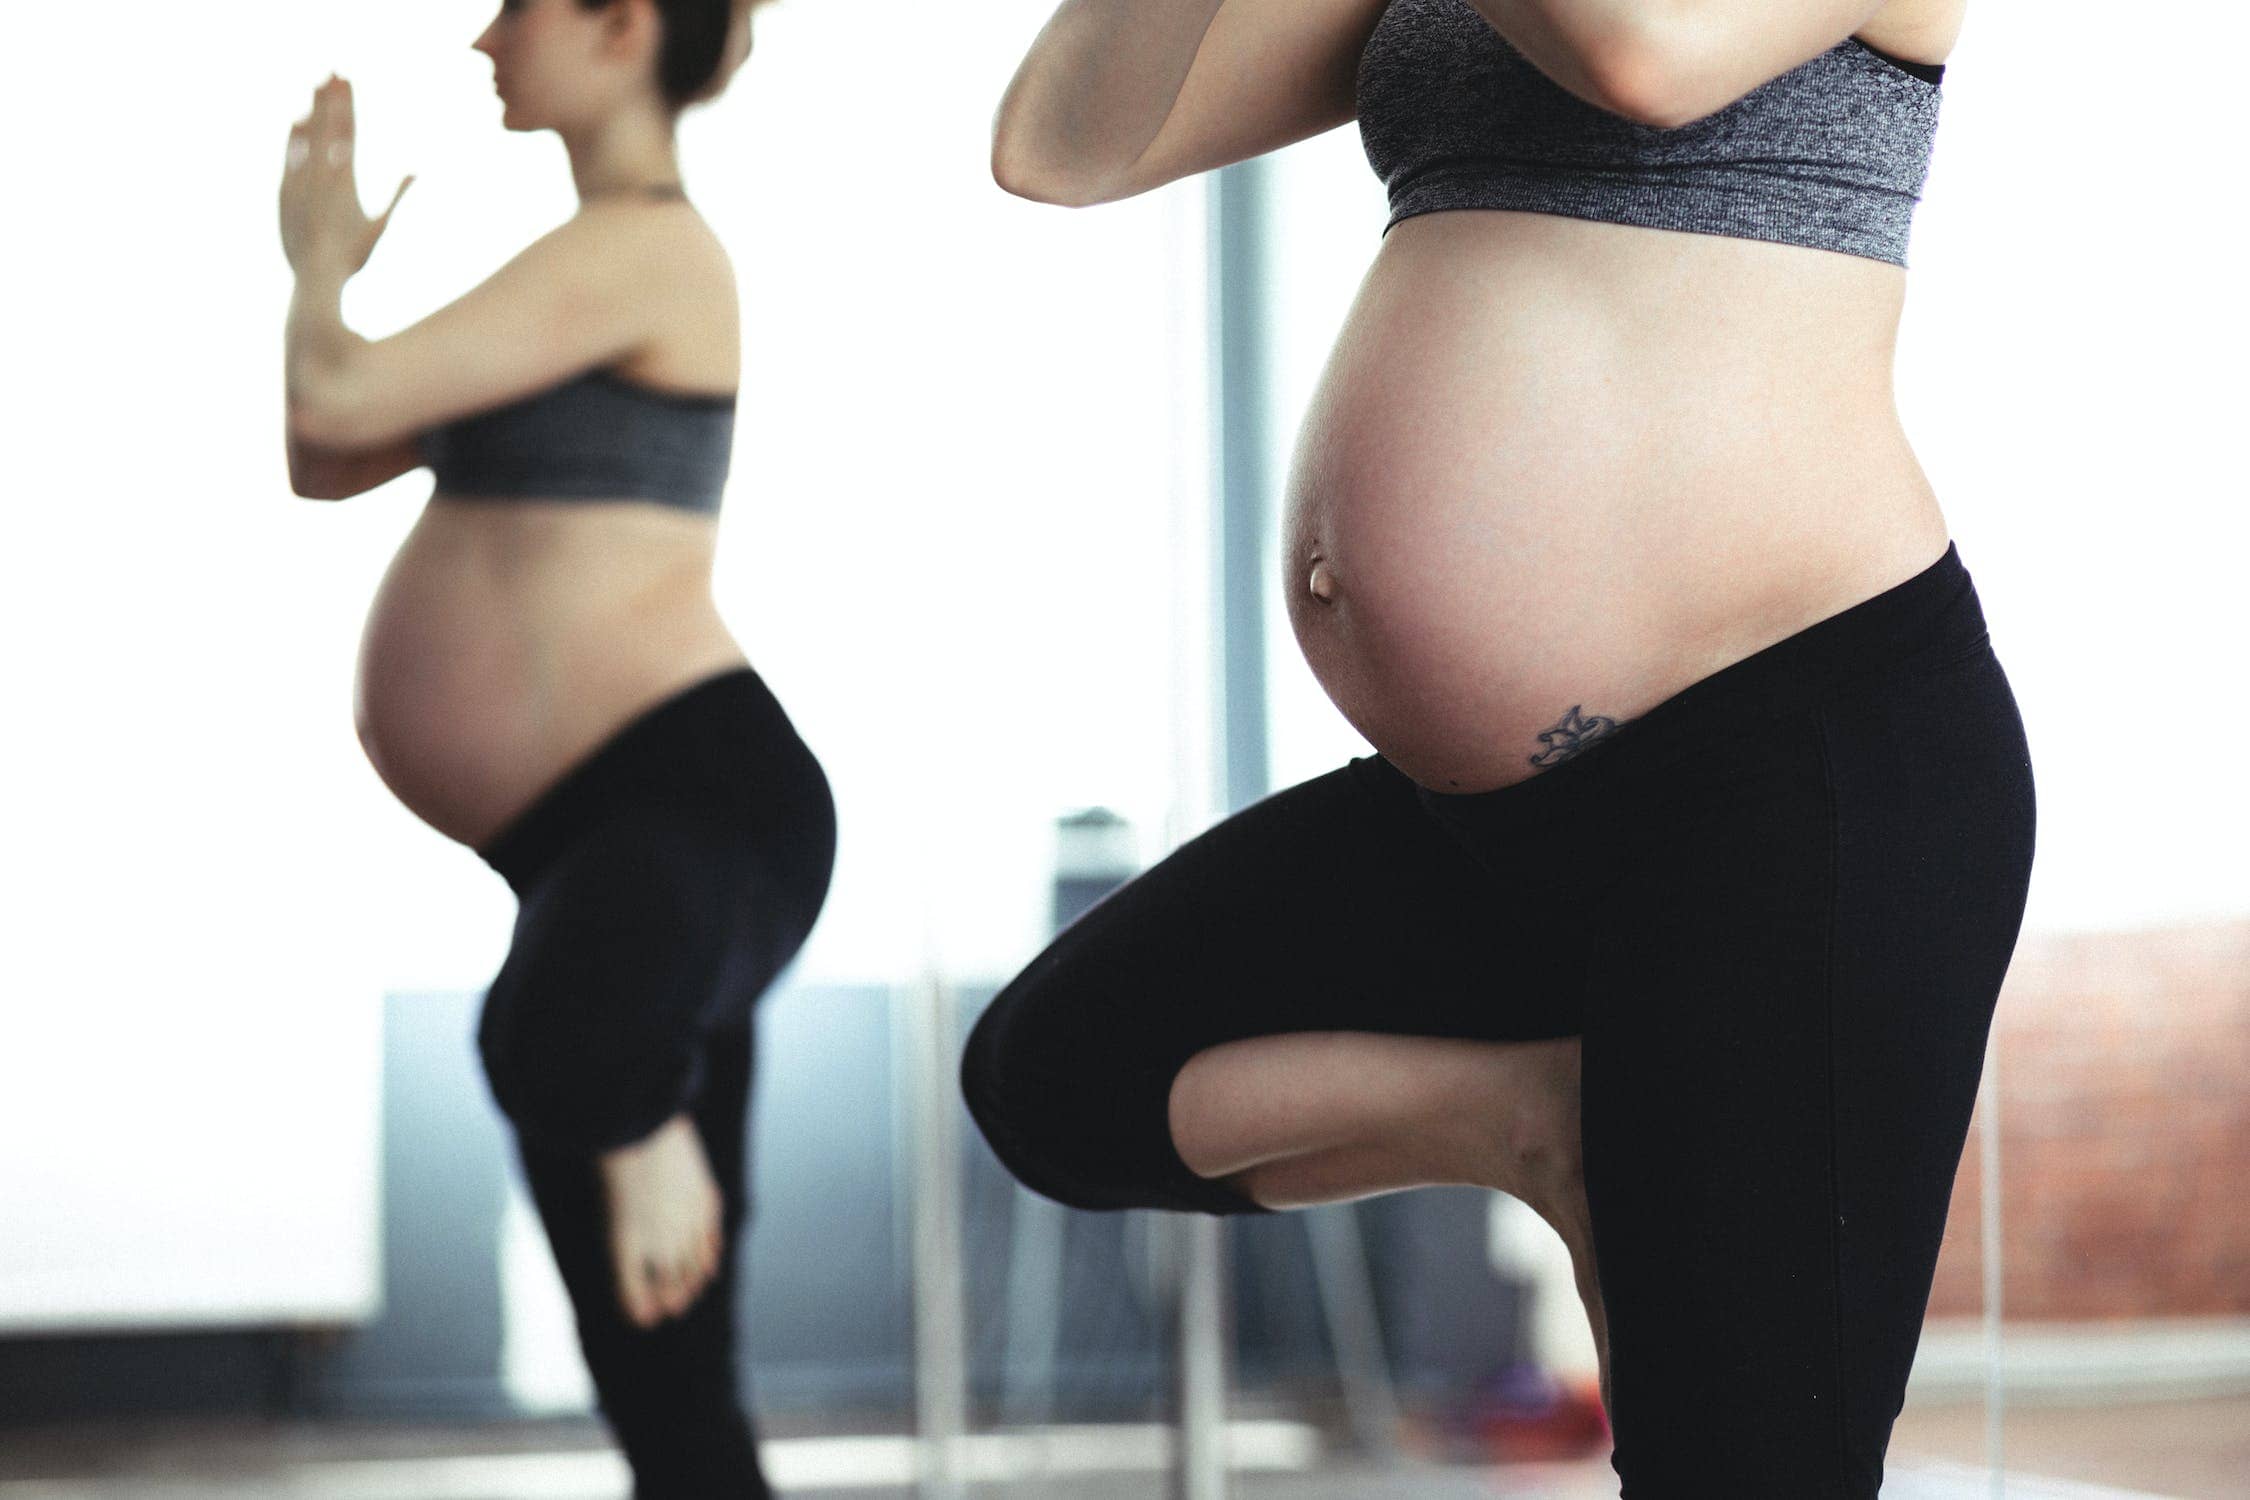 Exercises you can do while pregnant